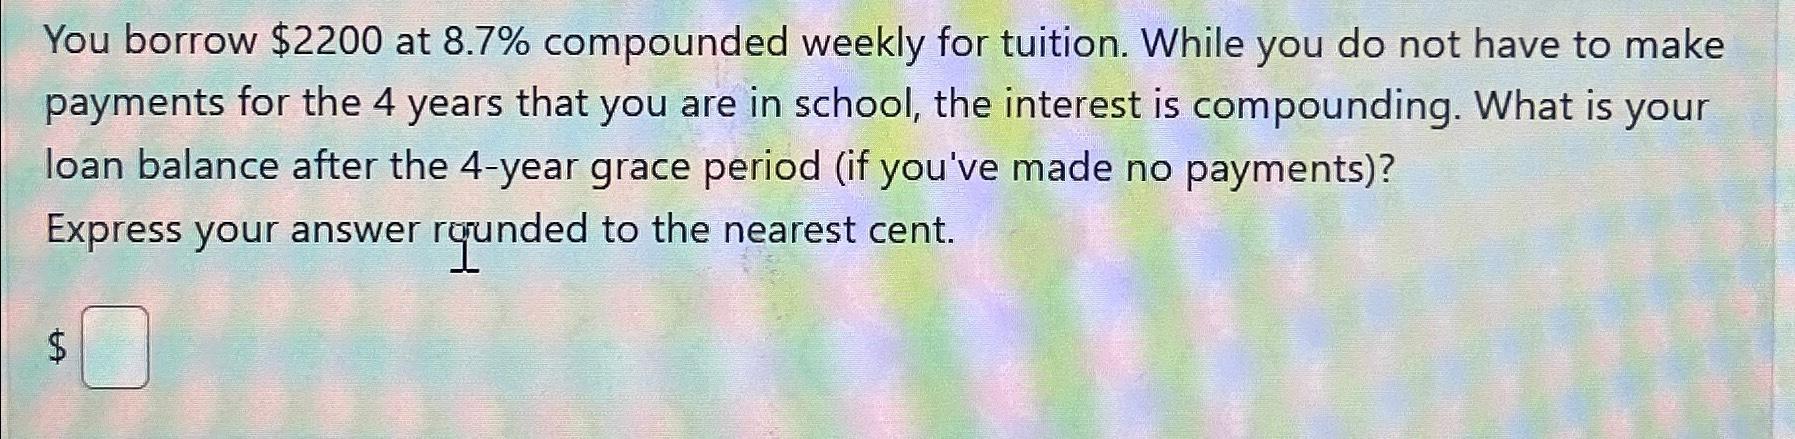 You borrow $2200 at 8.7% compounded weekly for tuition. While you do not have to make payments for the 4